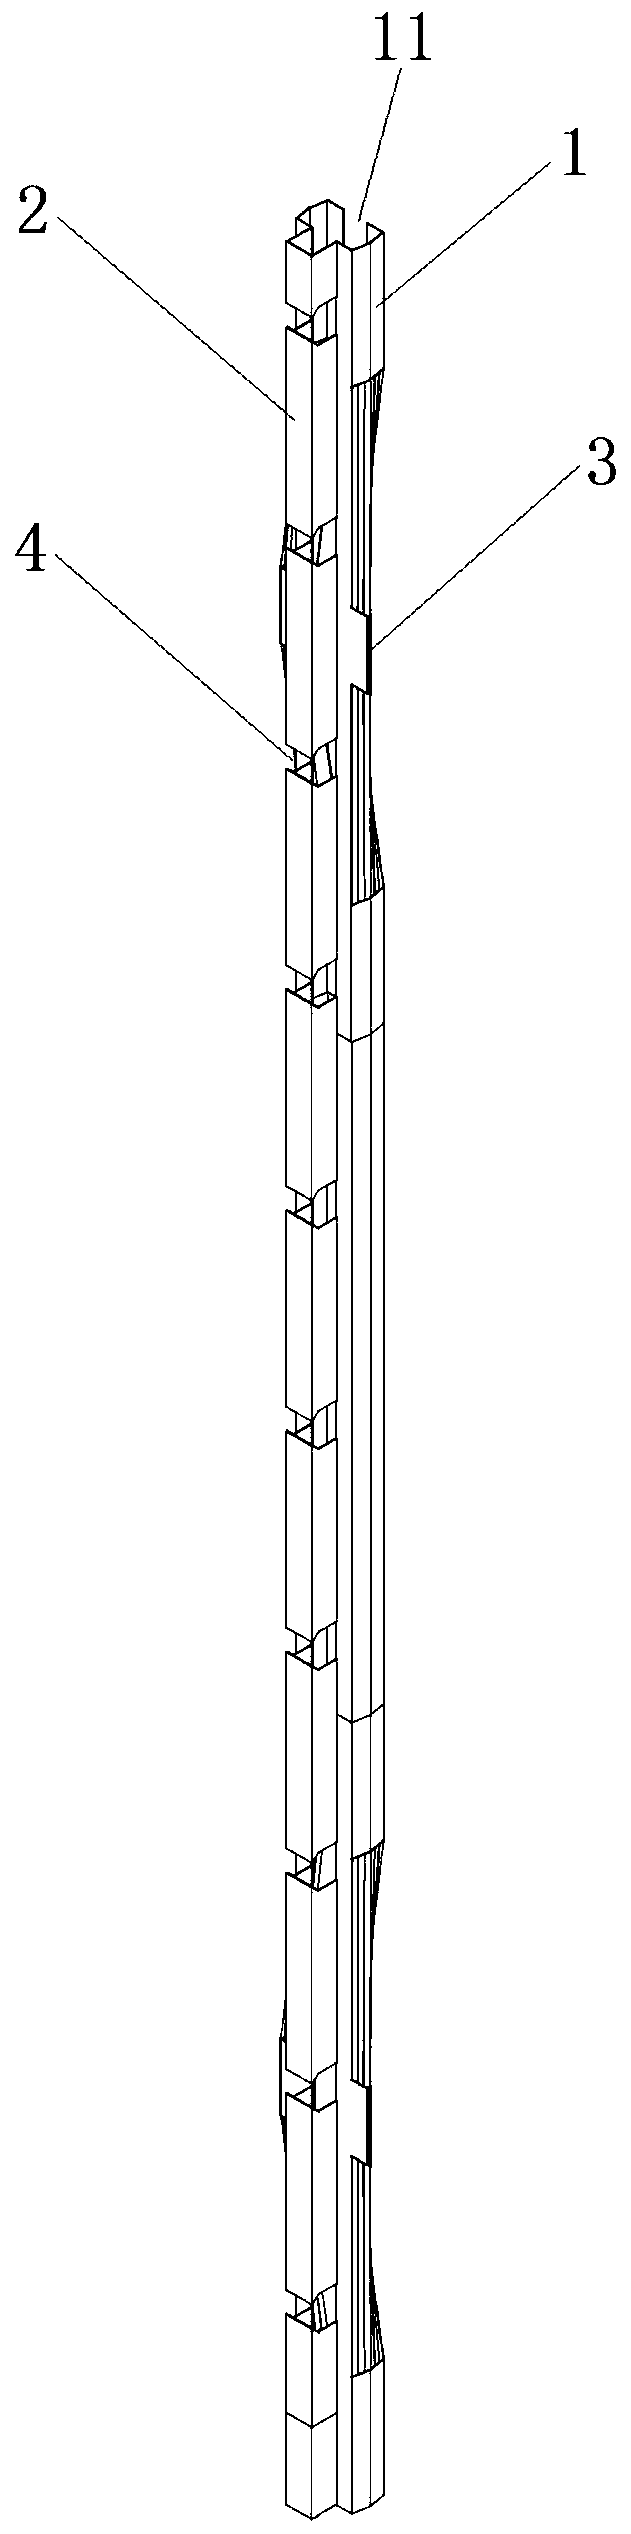 Variable-section keel